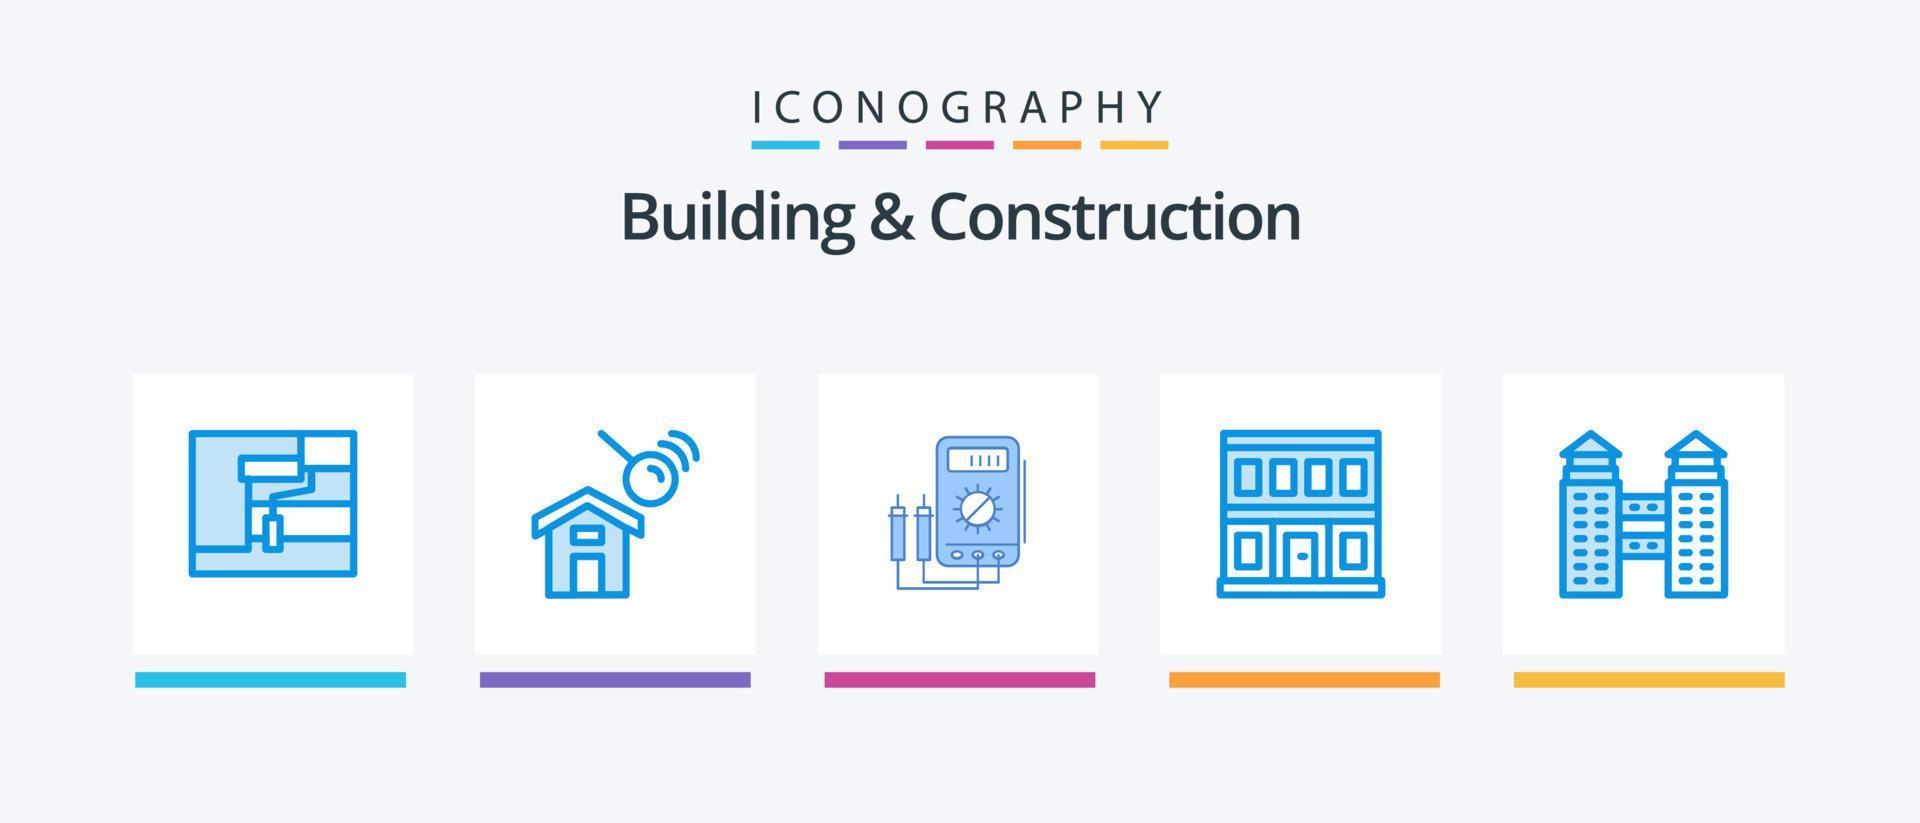 Building And Construction Blue 5 Icon Pack Including building. house. voltmeter. door. tester. Creative Icons Design vector